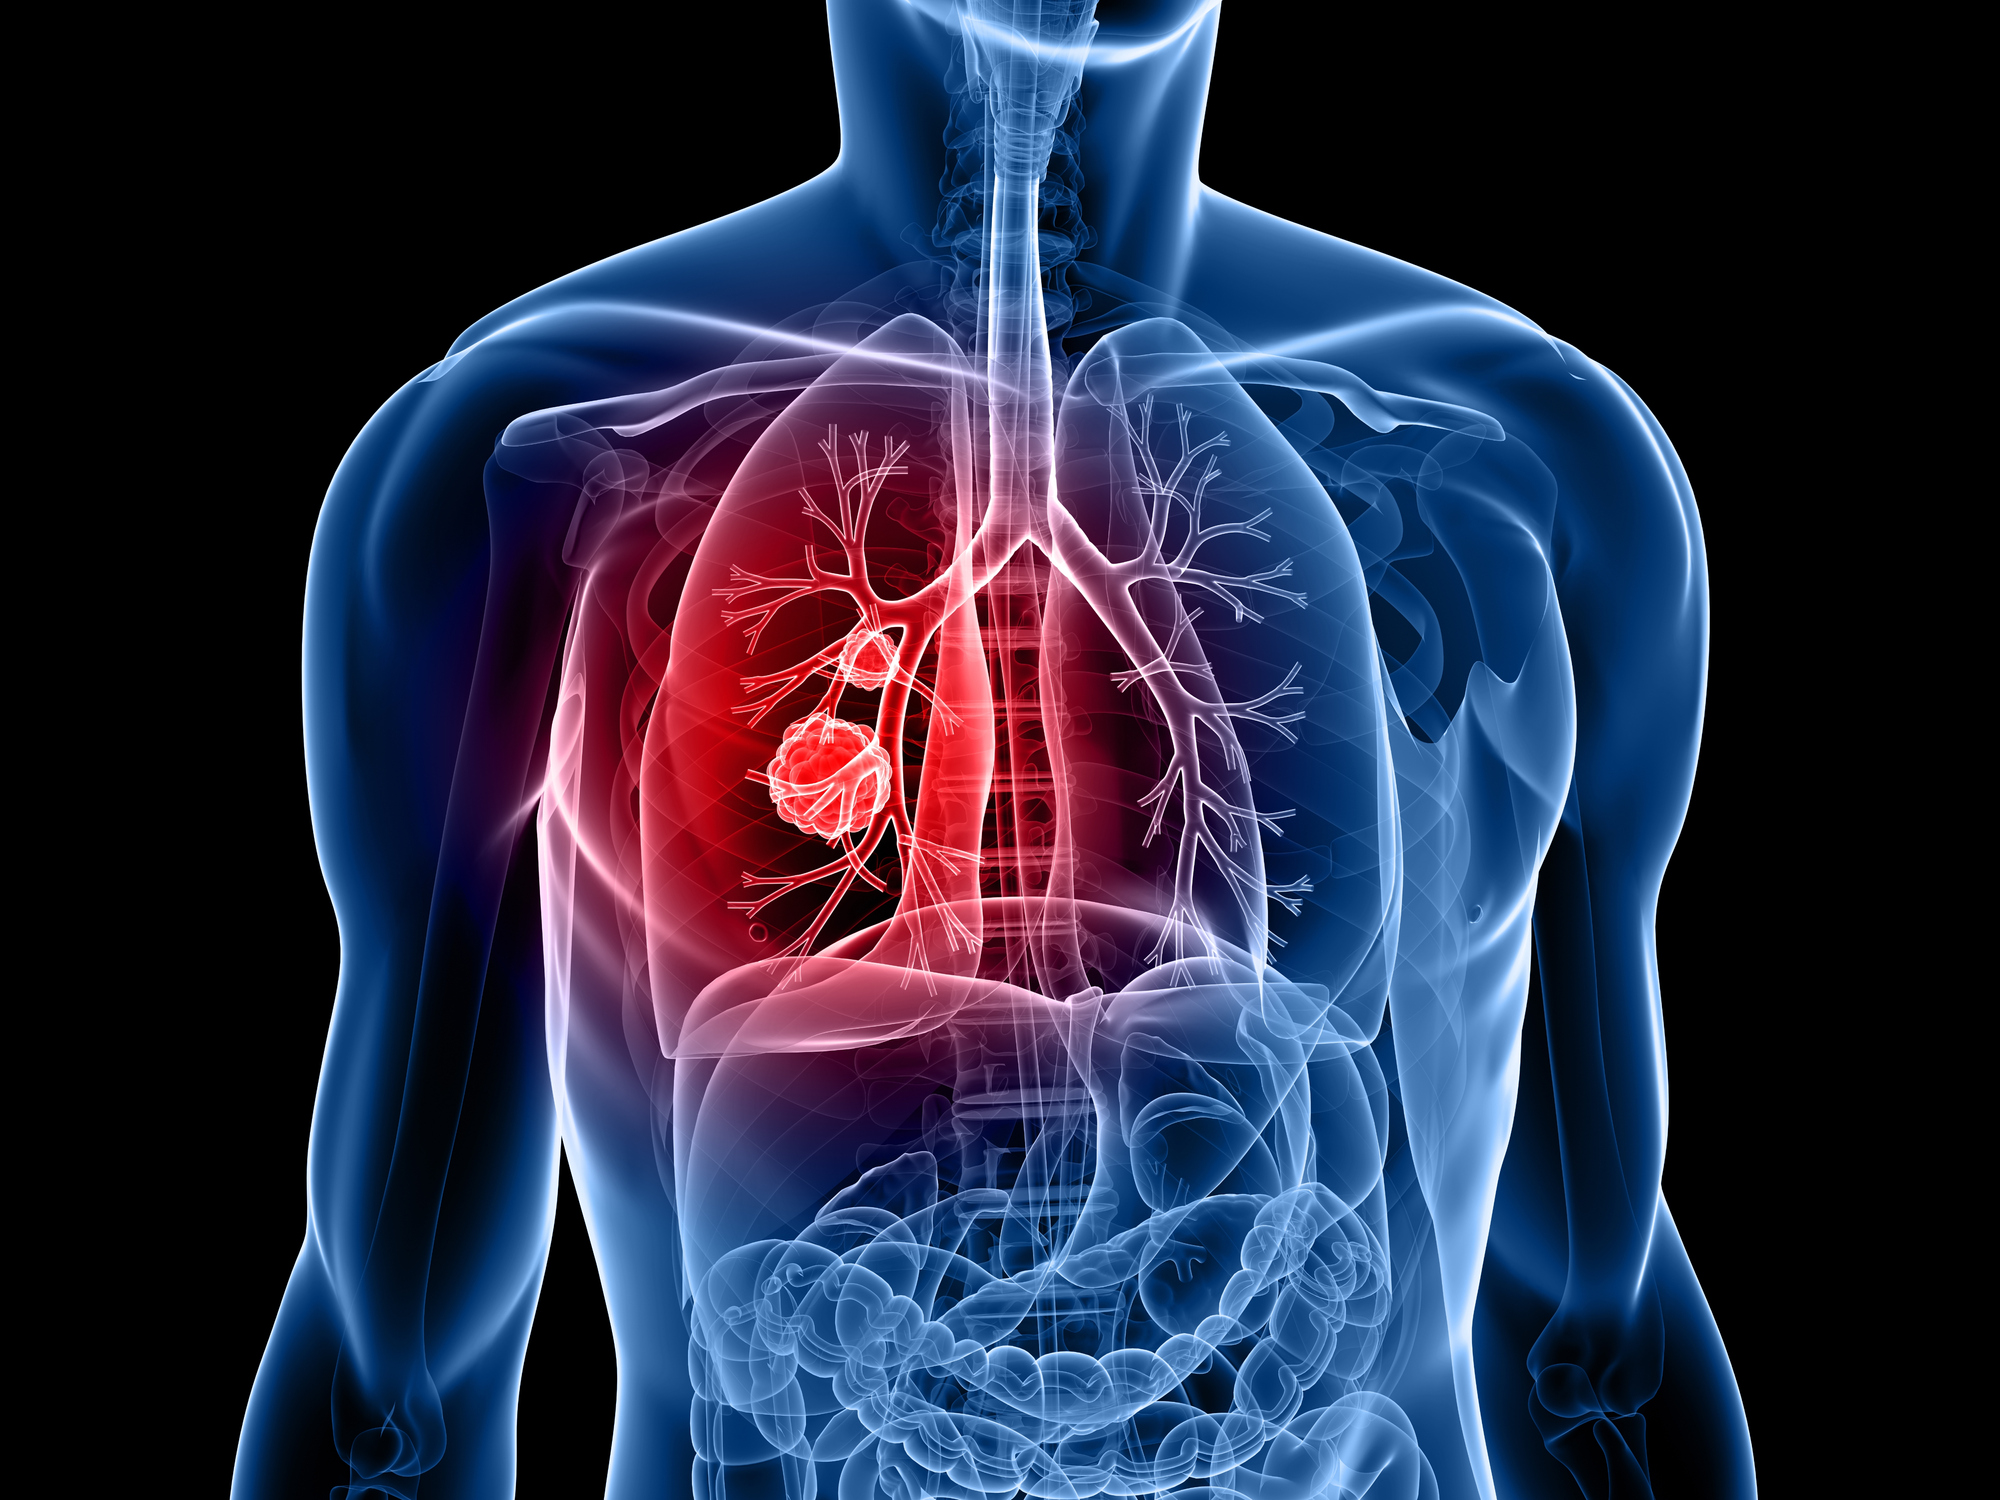 Lung Cancer: Prevalence and Impact of Medical Comorbidities